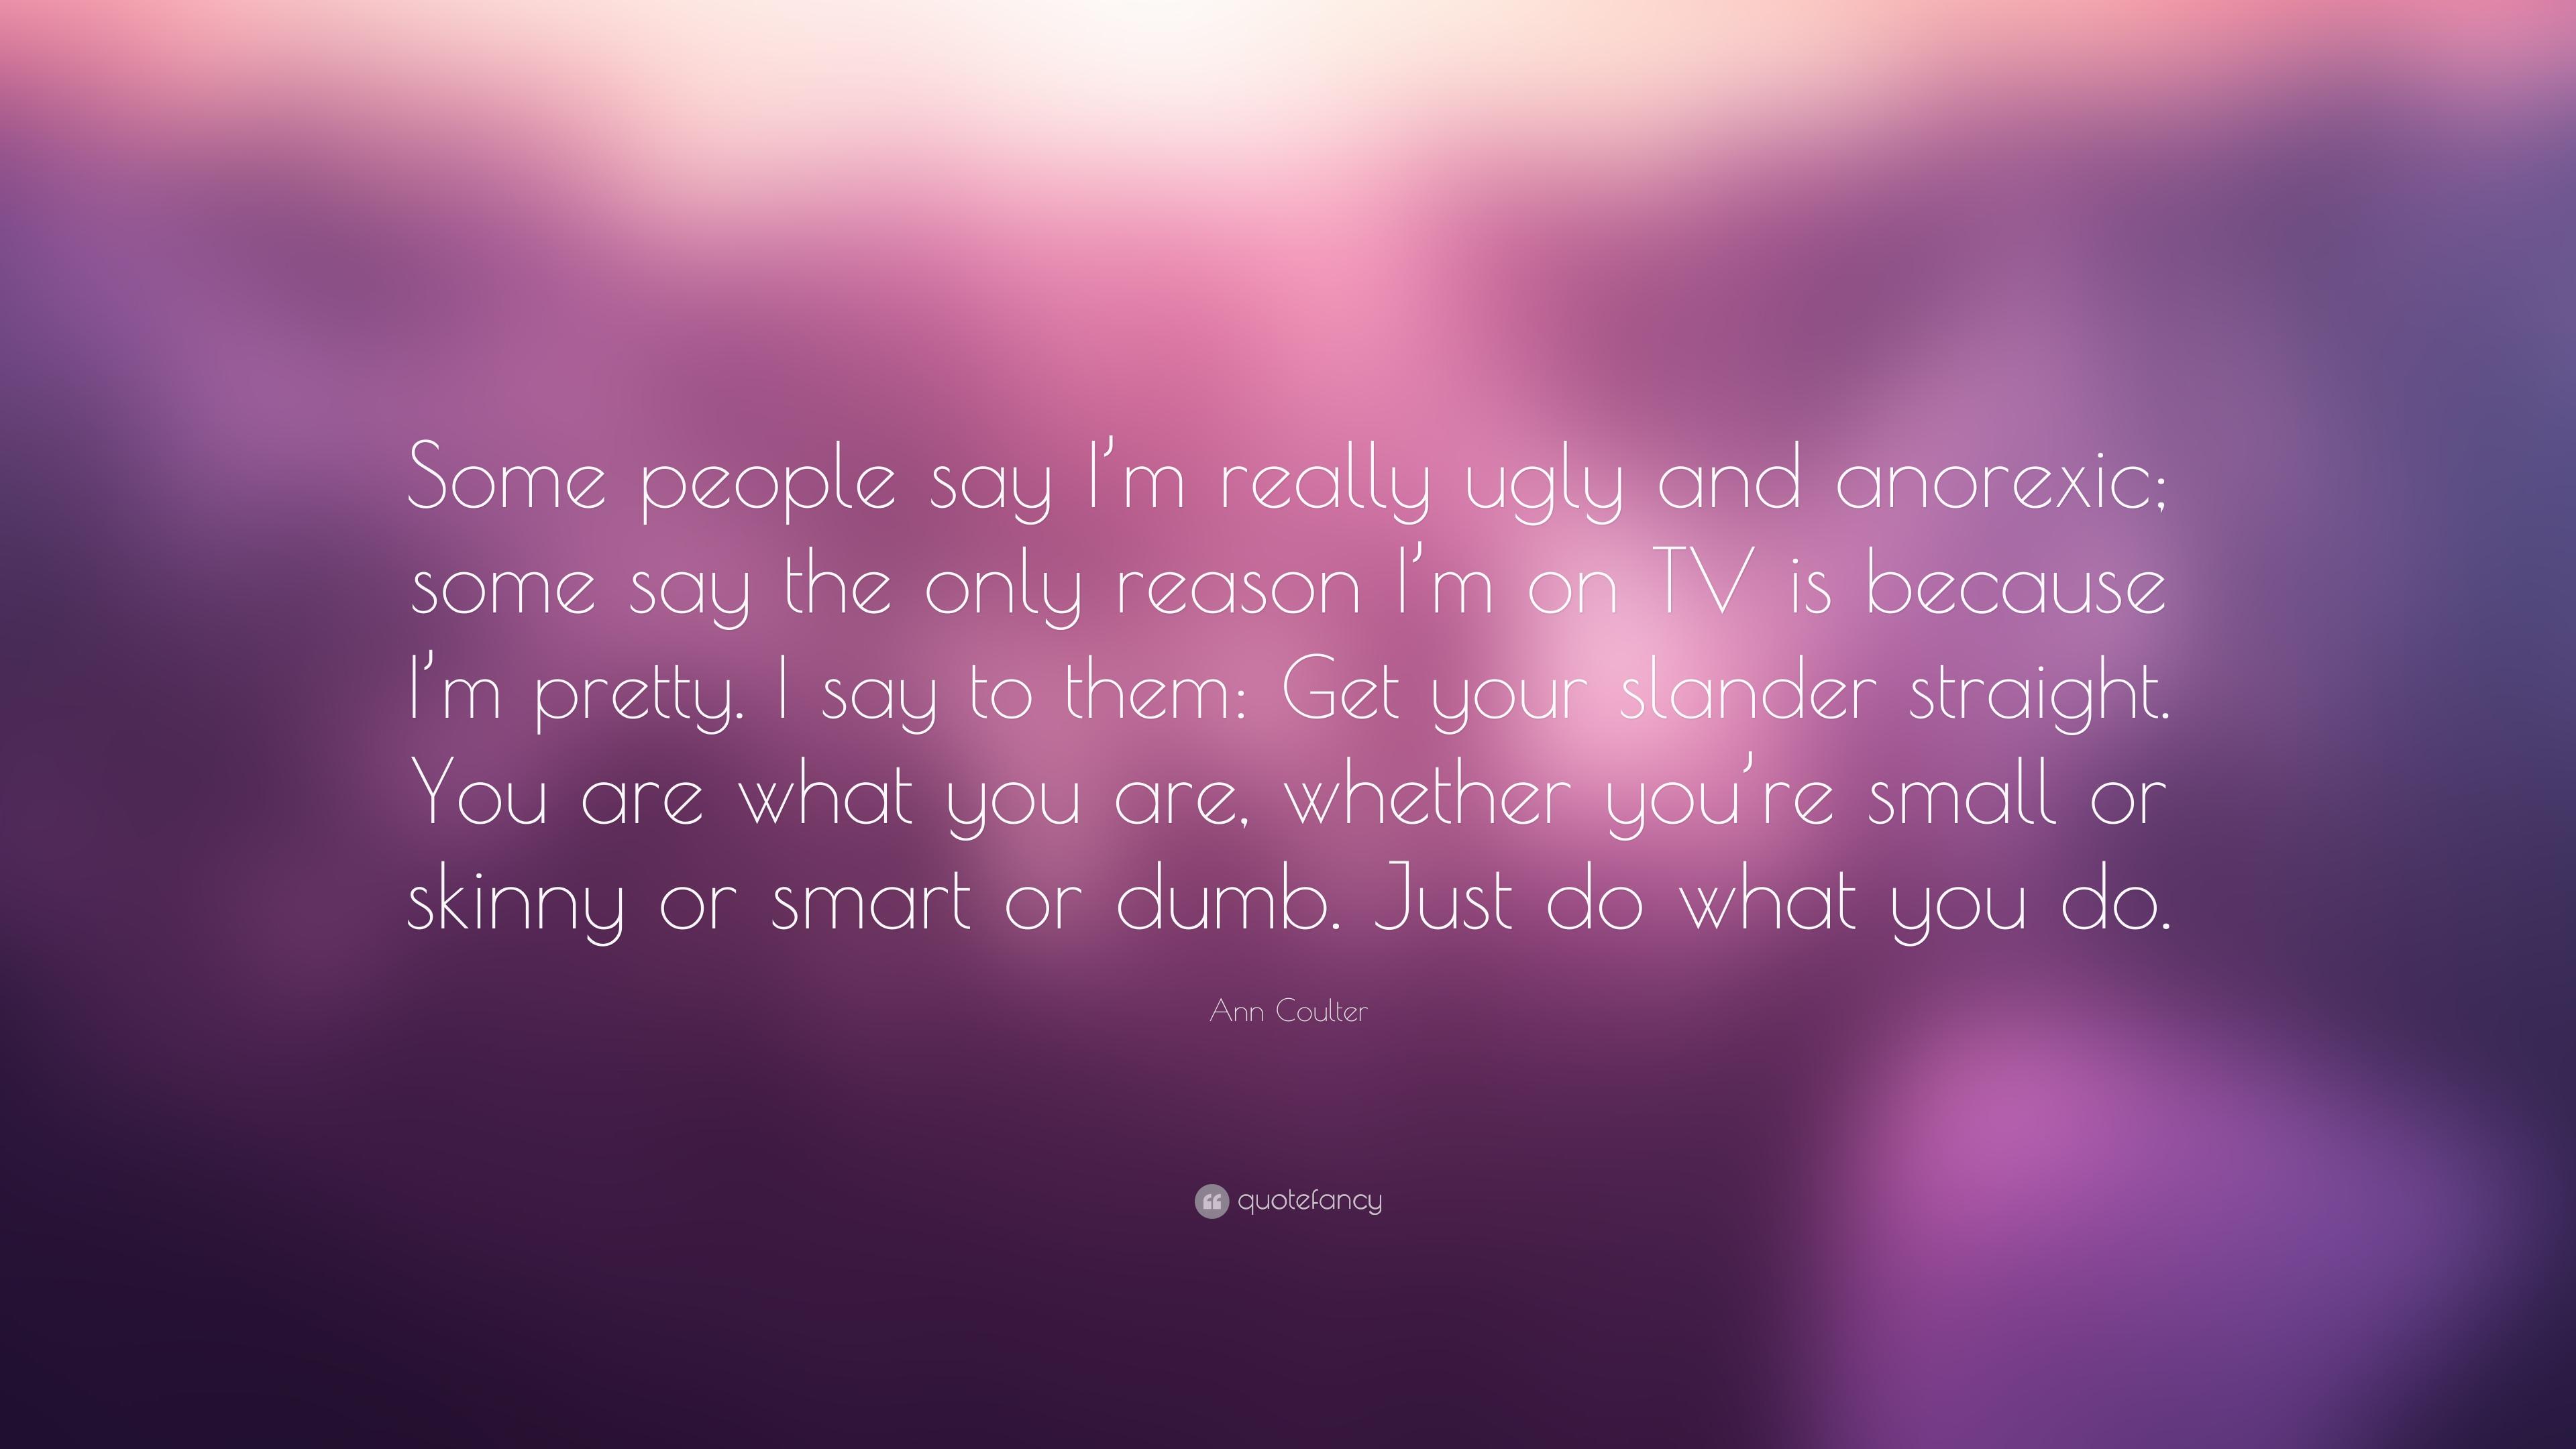 Ann Coulter Quote: “Some people say I'm really ugly